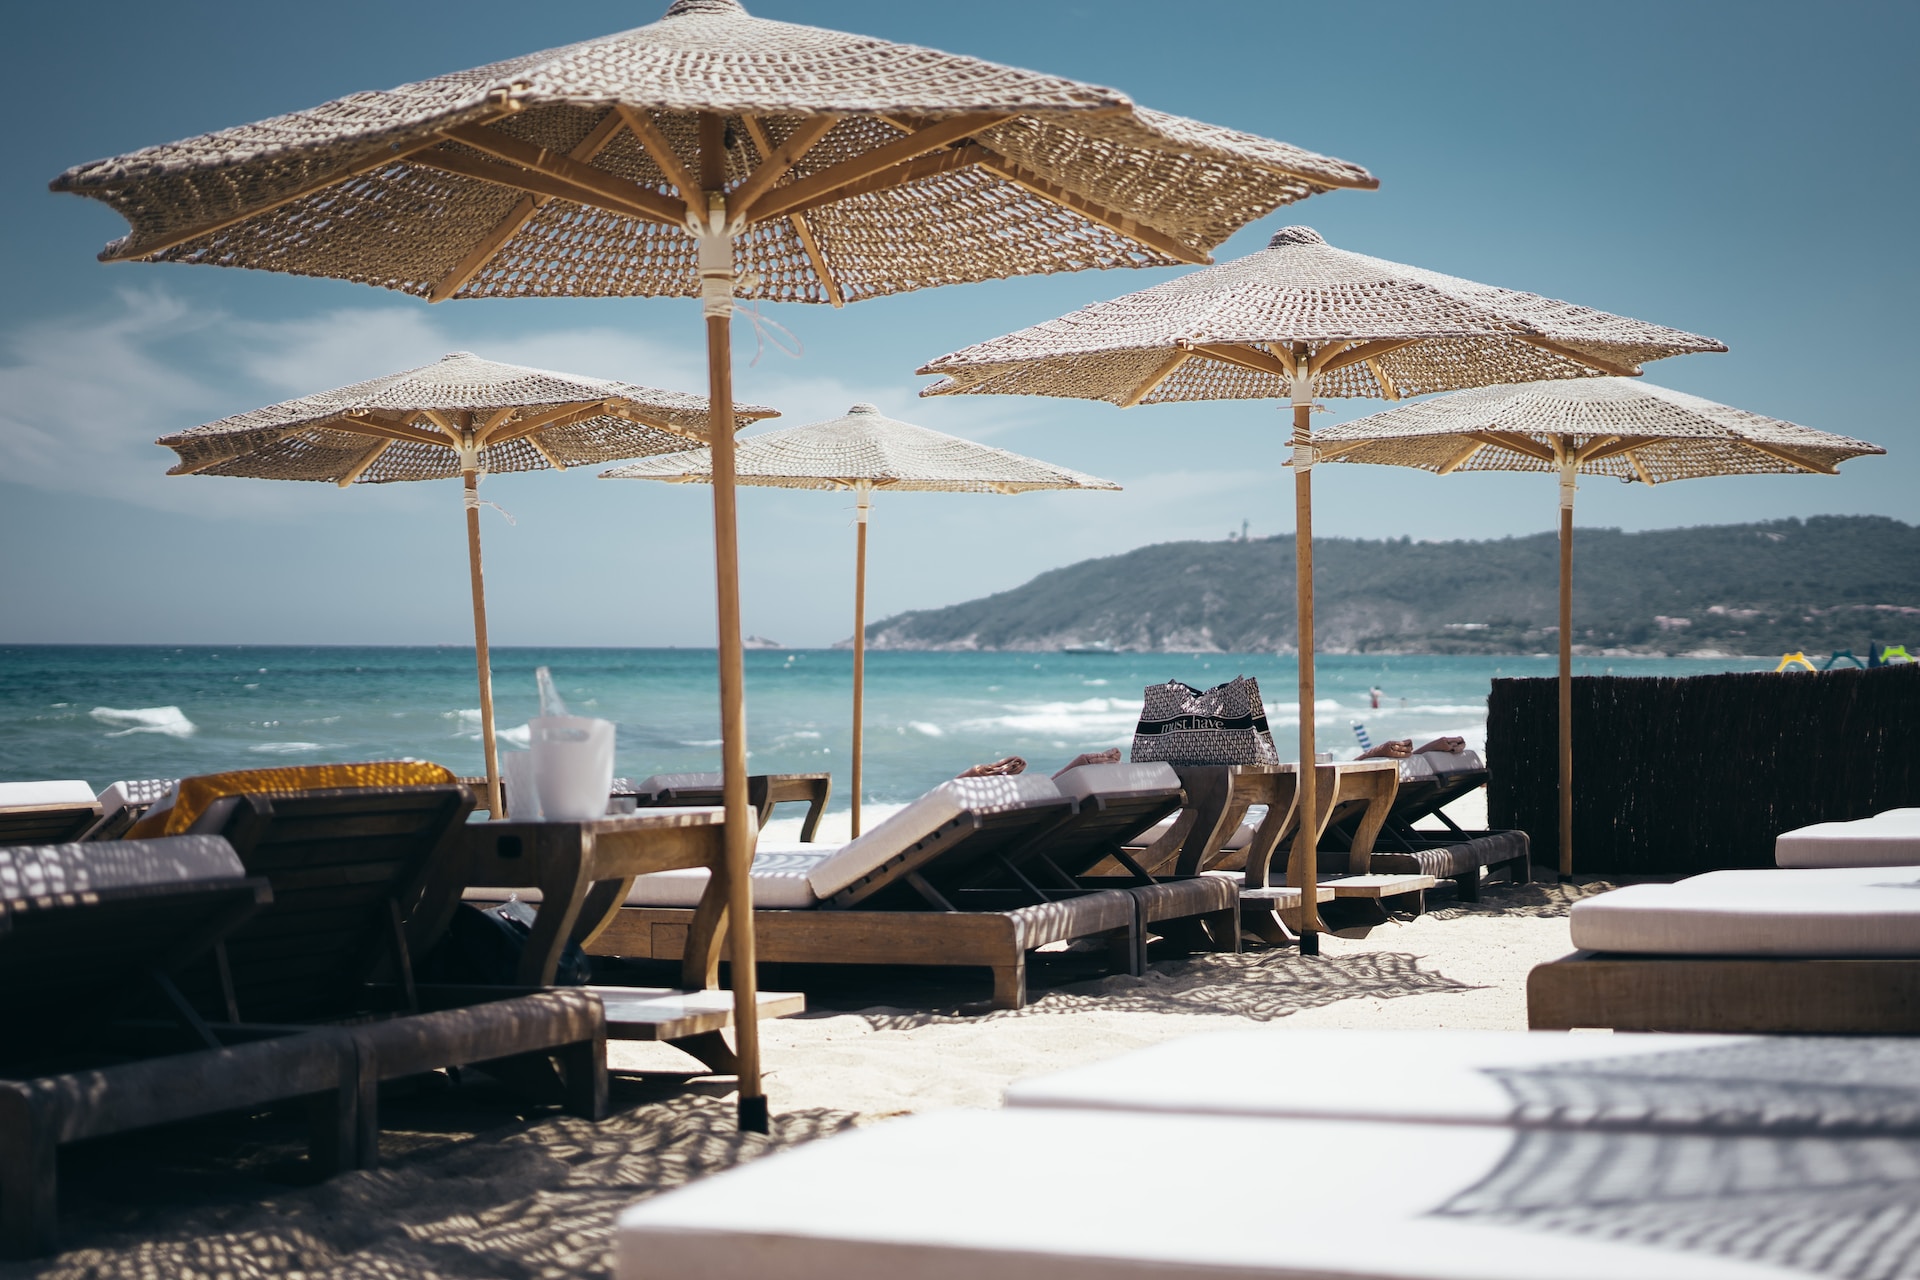 Umbrellas and lounge chairs on white sand beach